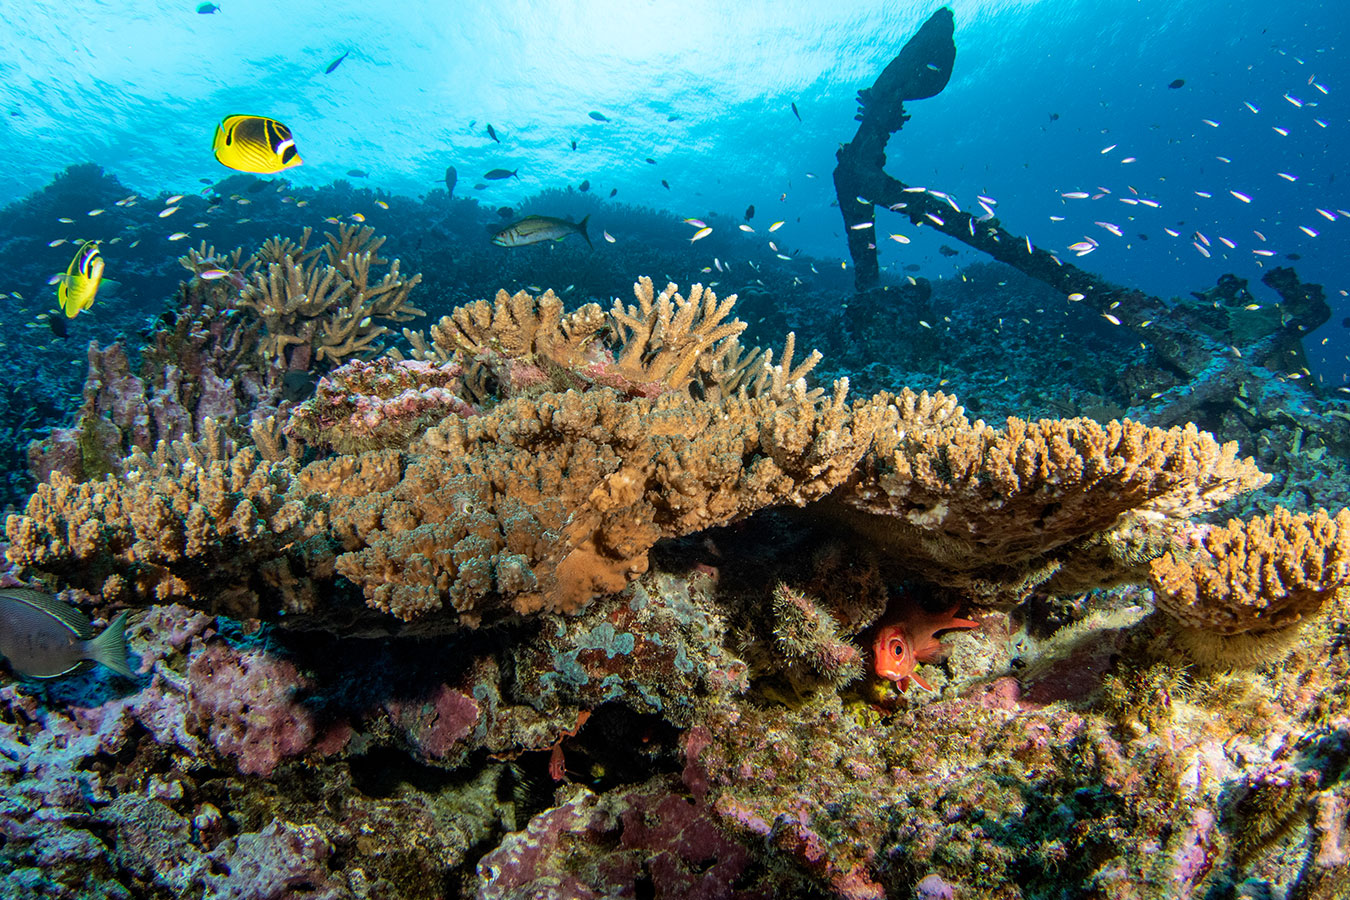 Resilience-based management is used to protect and conserve coral reef ecosystems.  
				Credit: NOAA Fisheries/Jeff Milisen